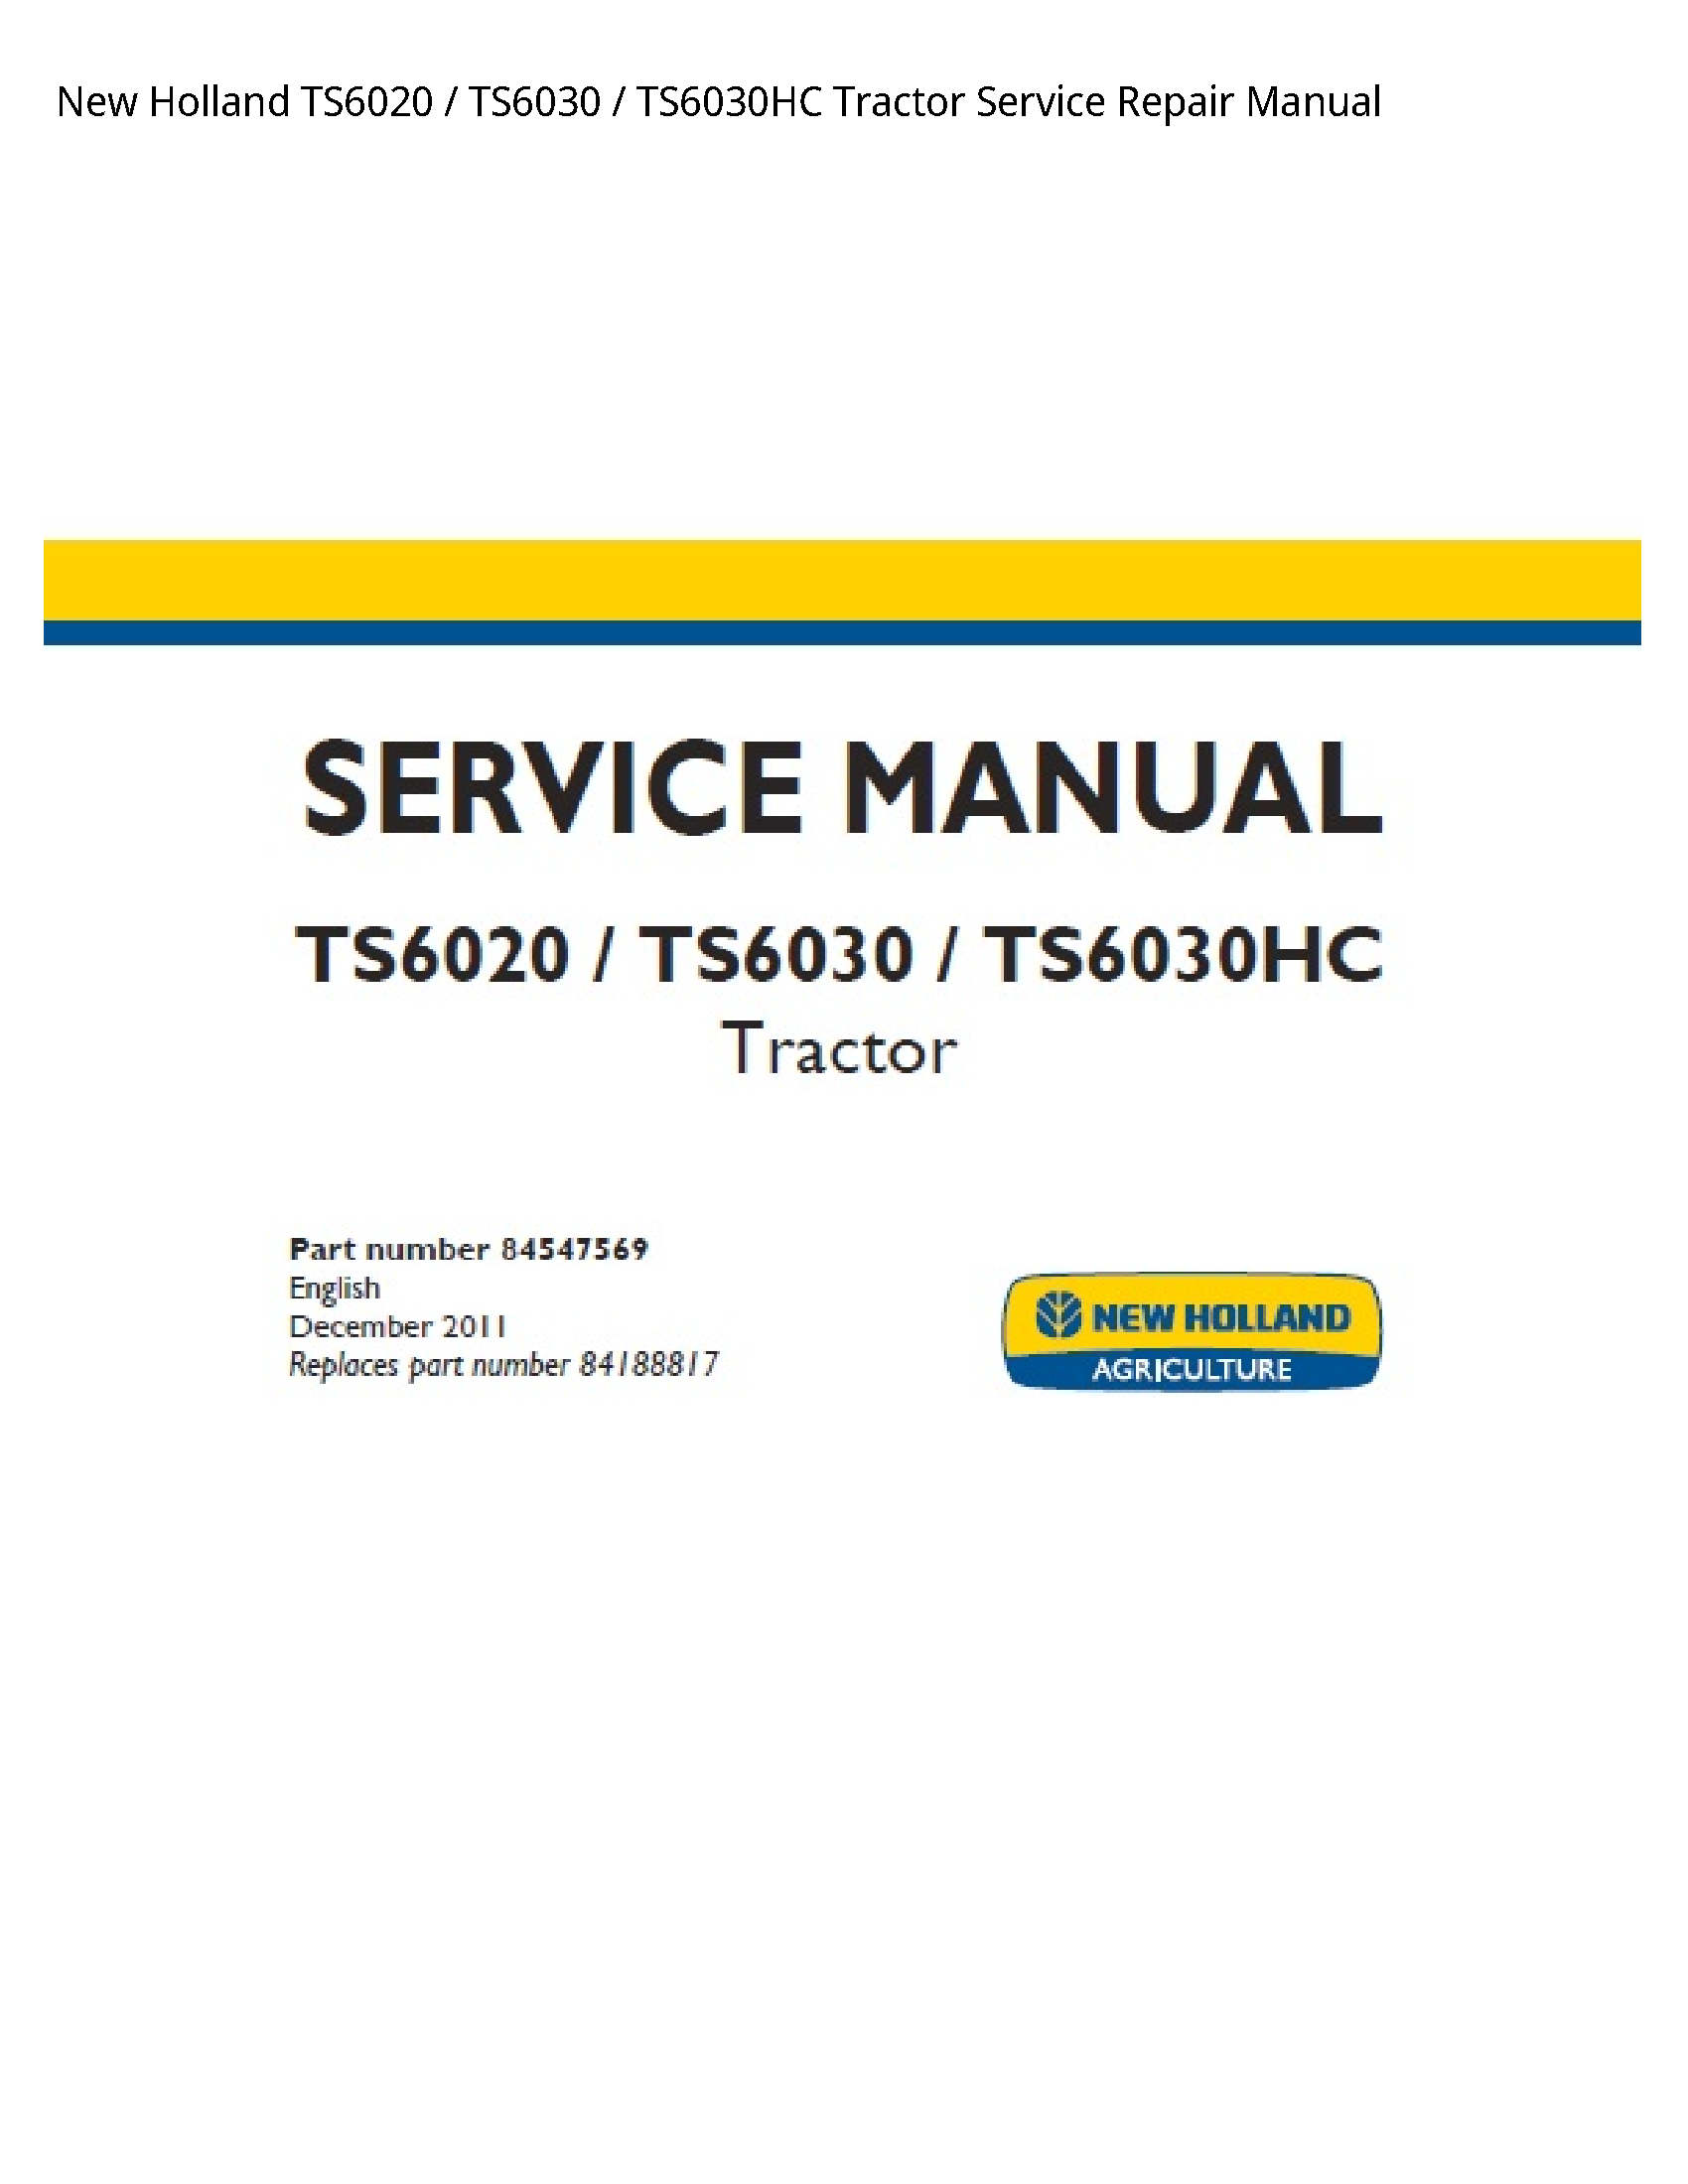 New Holland TS6020 Tractor manual